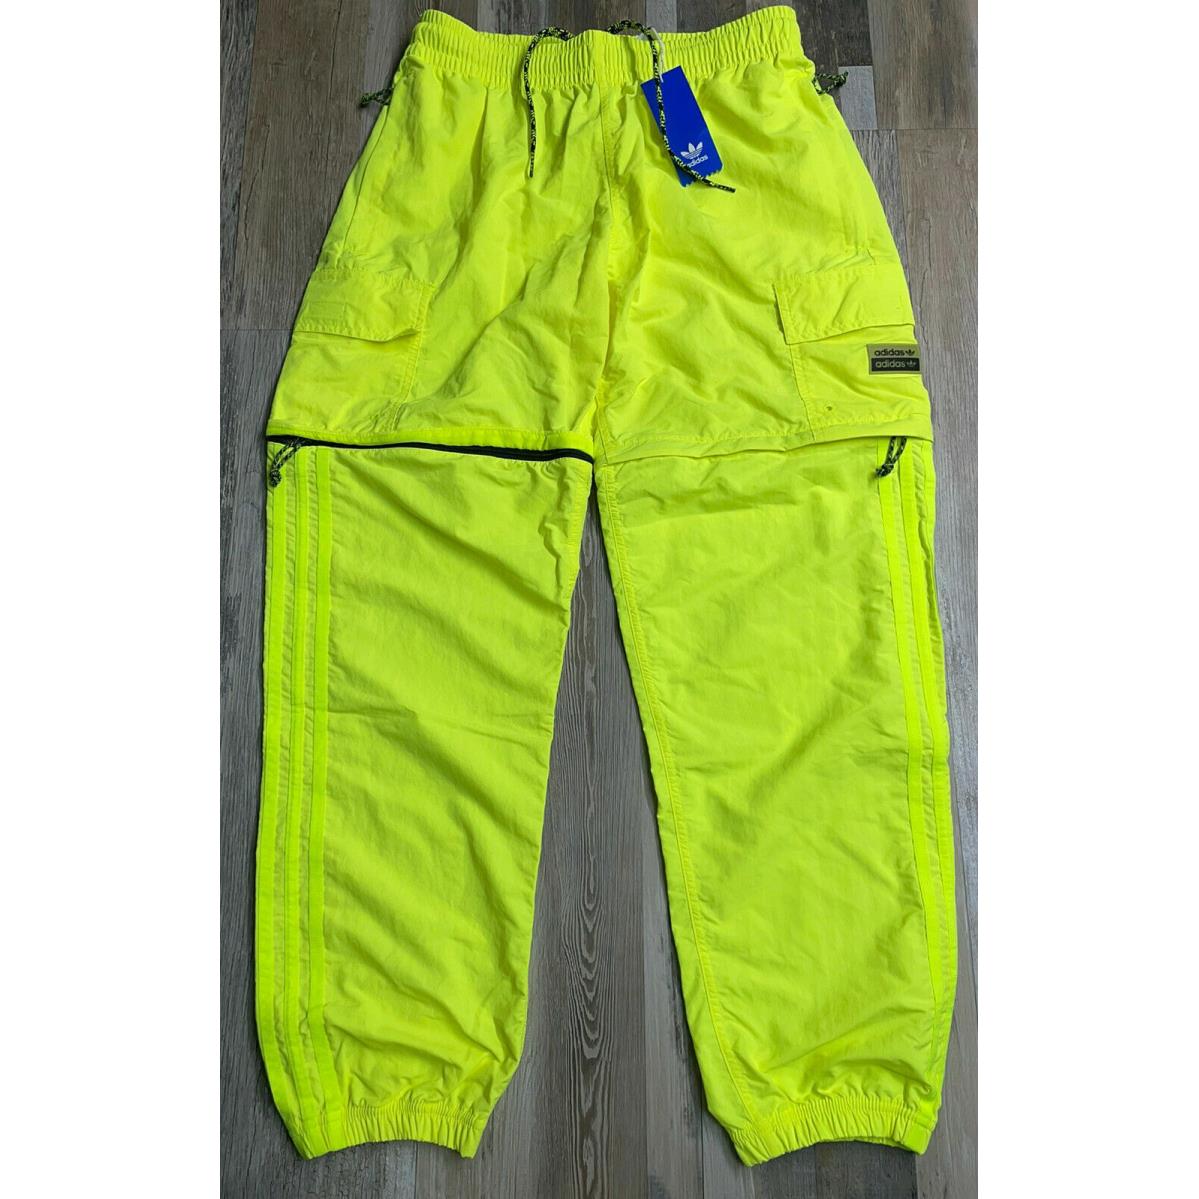 Adidas Originals Ryv Utility 2-In-1 Pants Yellow GN3302 Mens Sz S